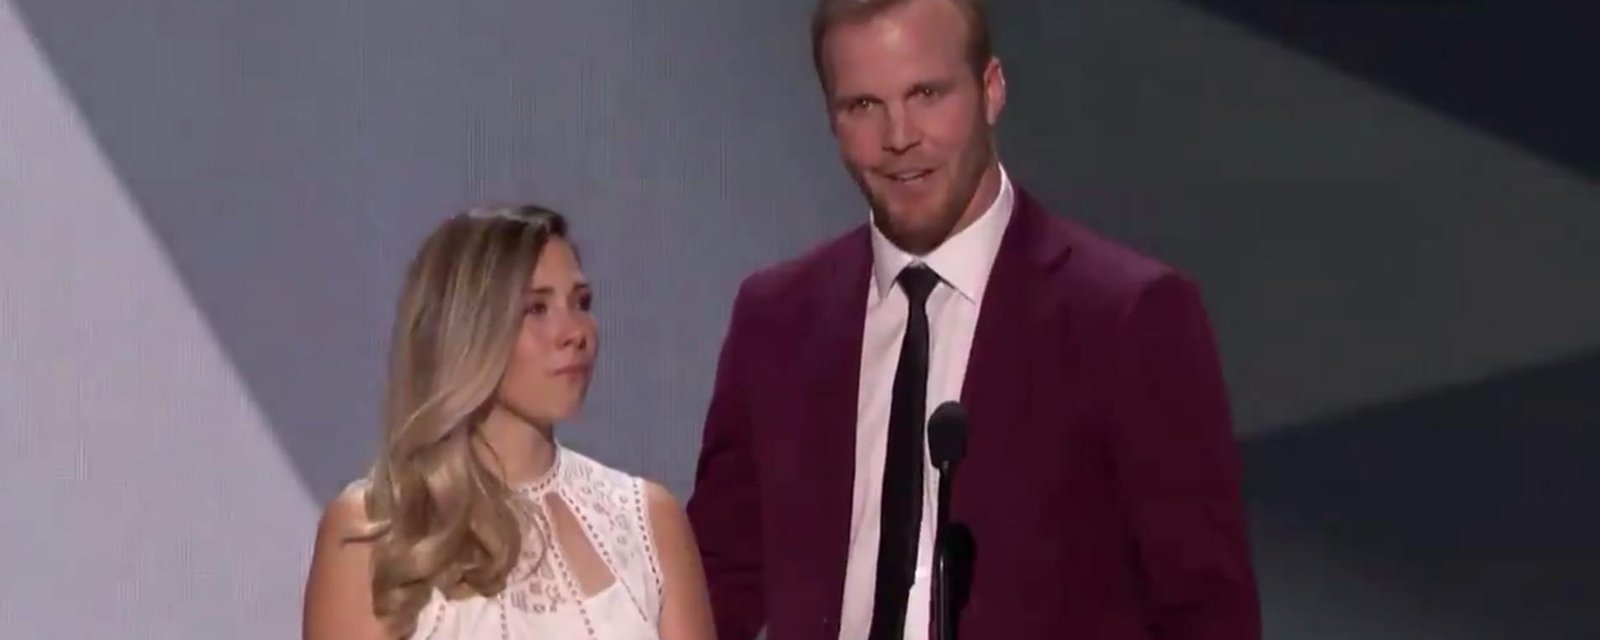 Must watch : Bryan Bickell's touching tribute from NHL Awards. 